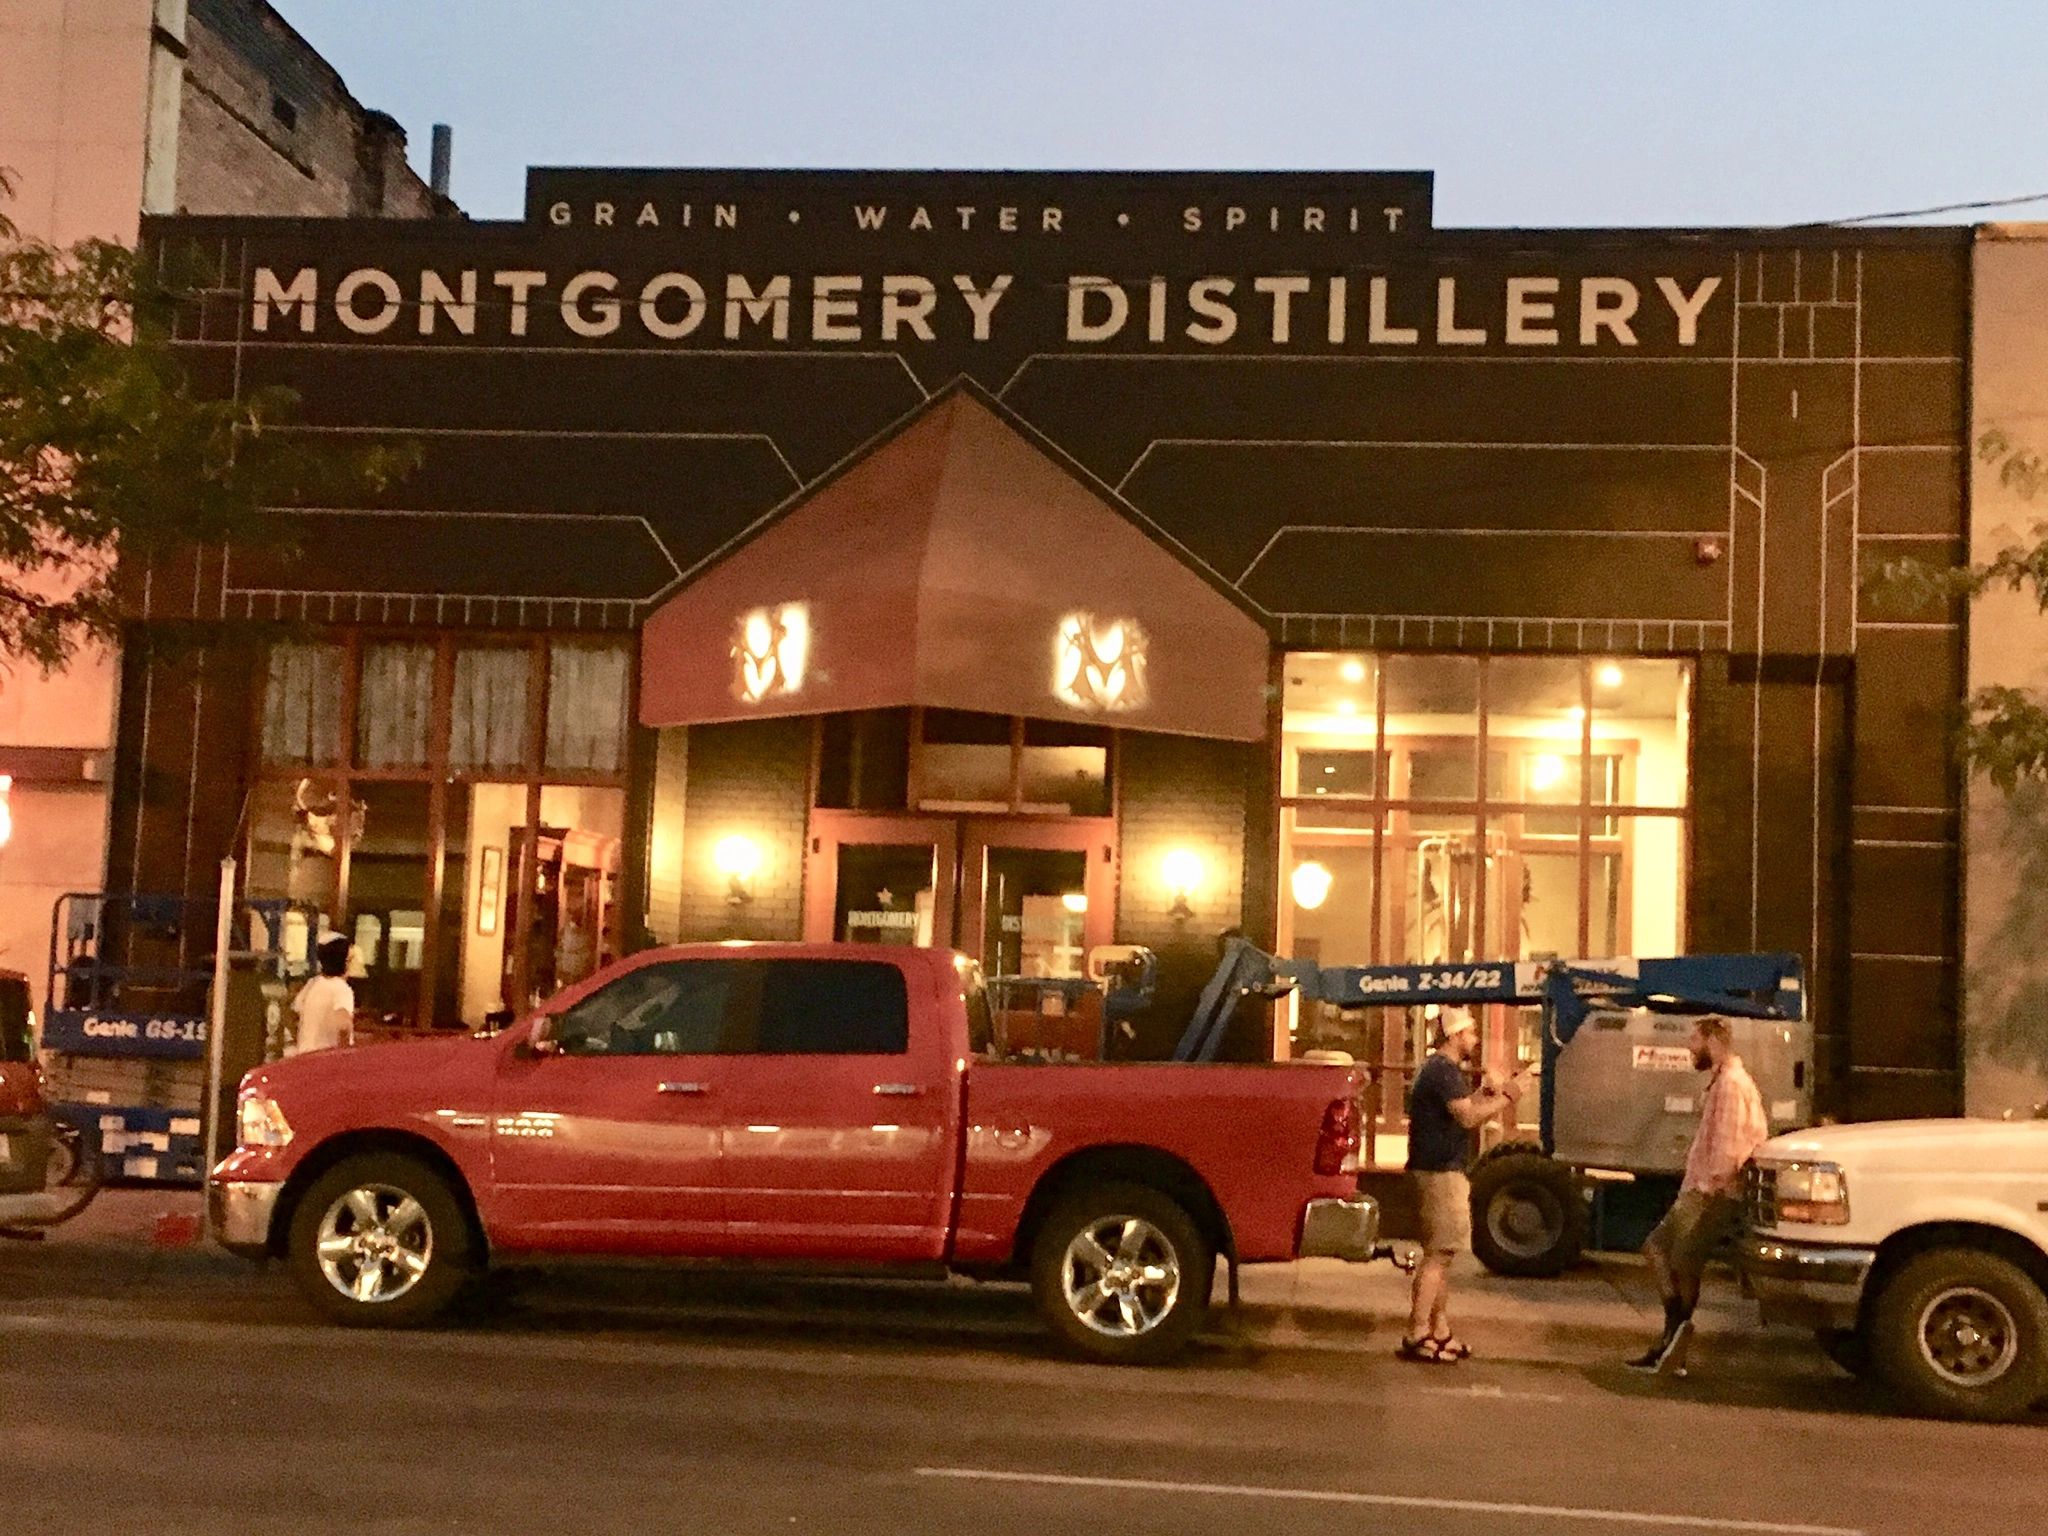 Facade of the Montgomery Distillery in Missoula, Montana with painted accent lines and lettering